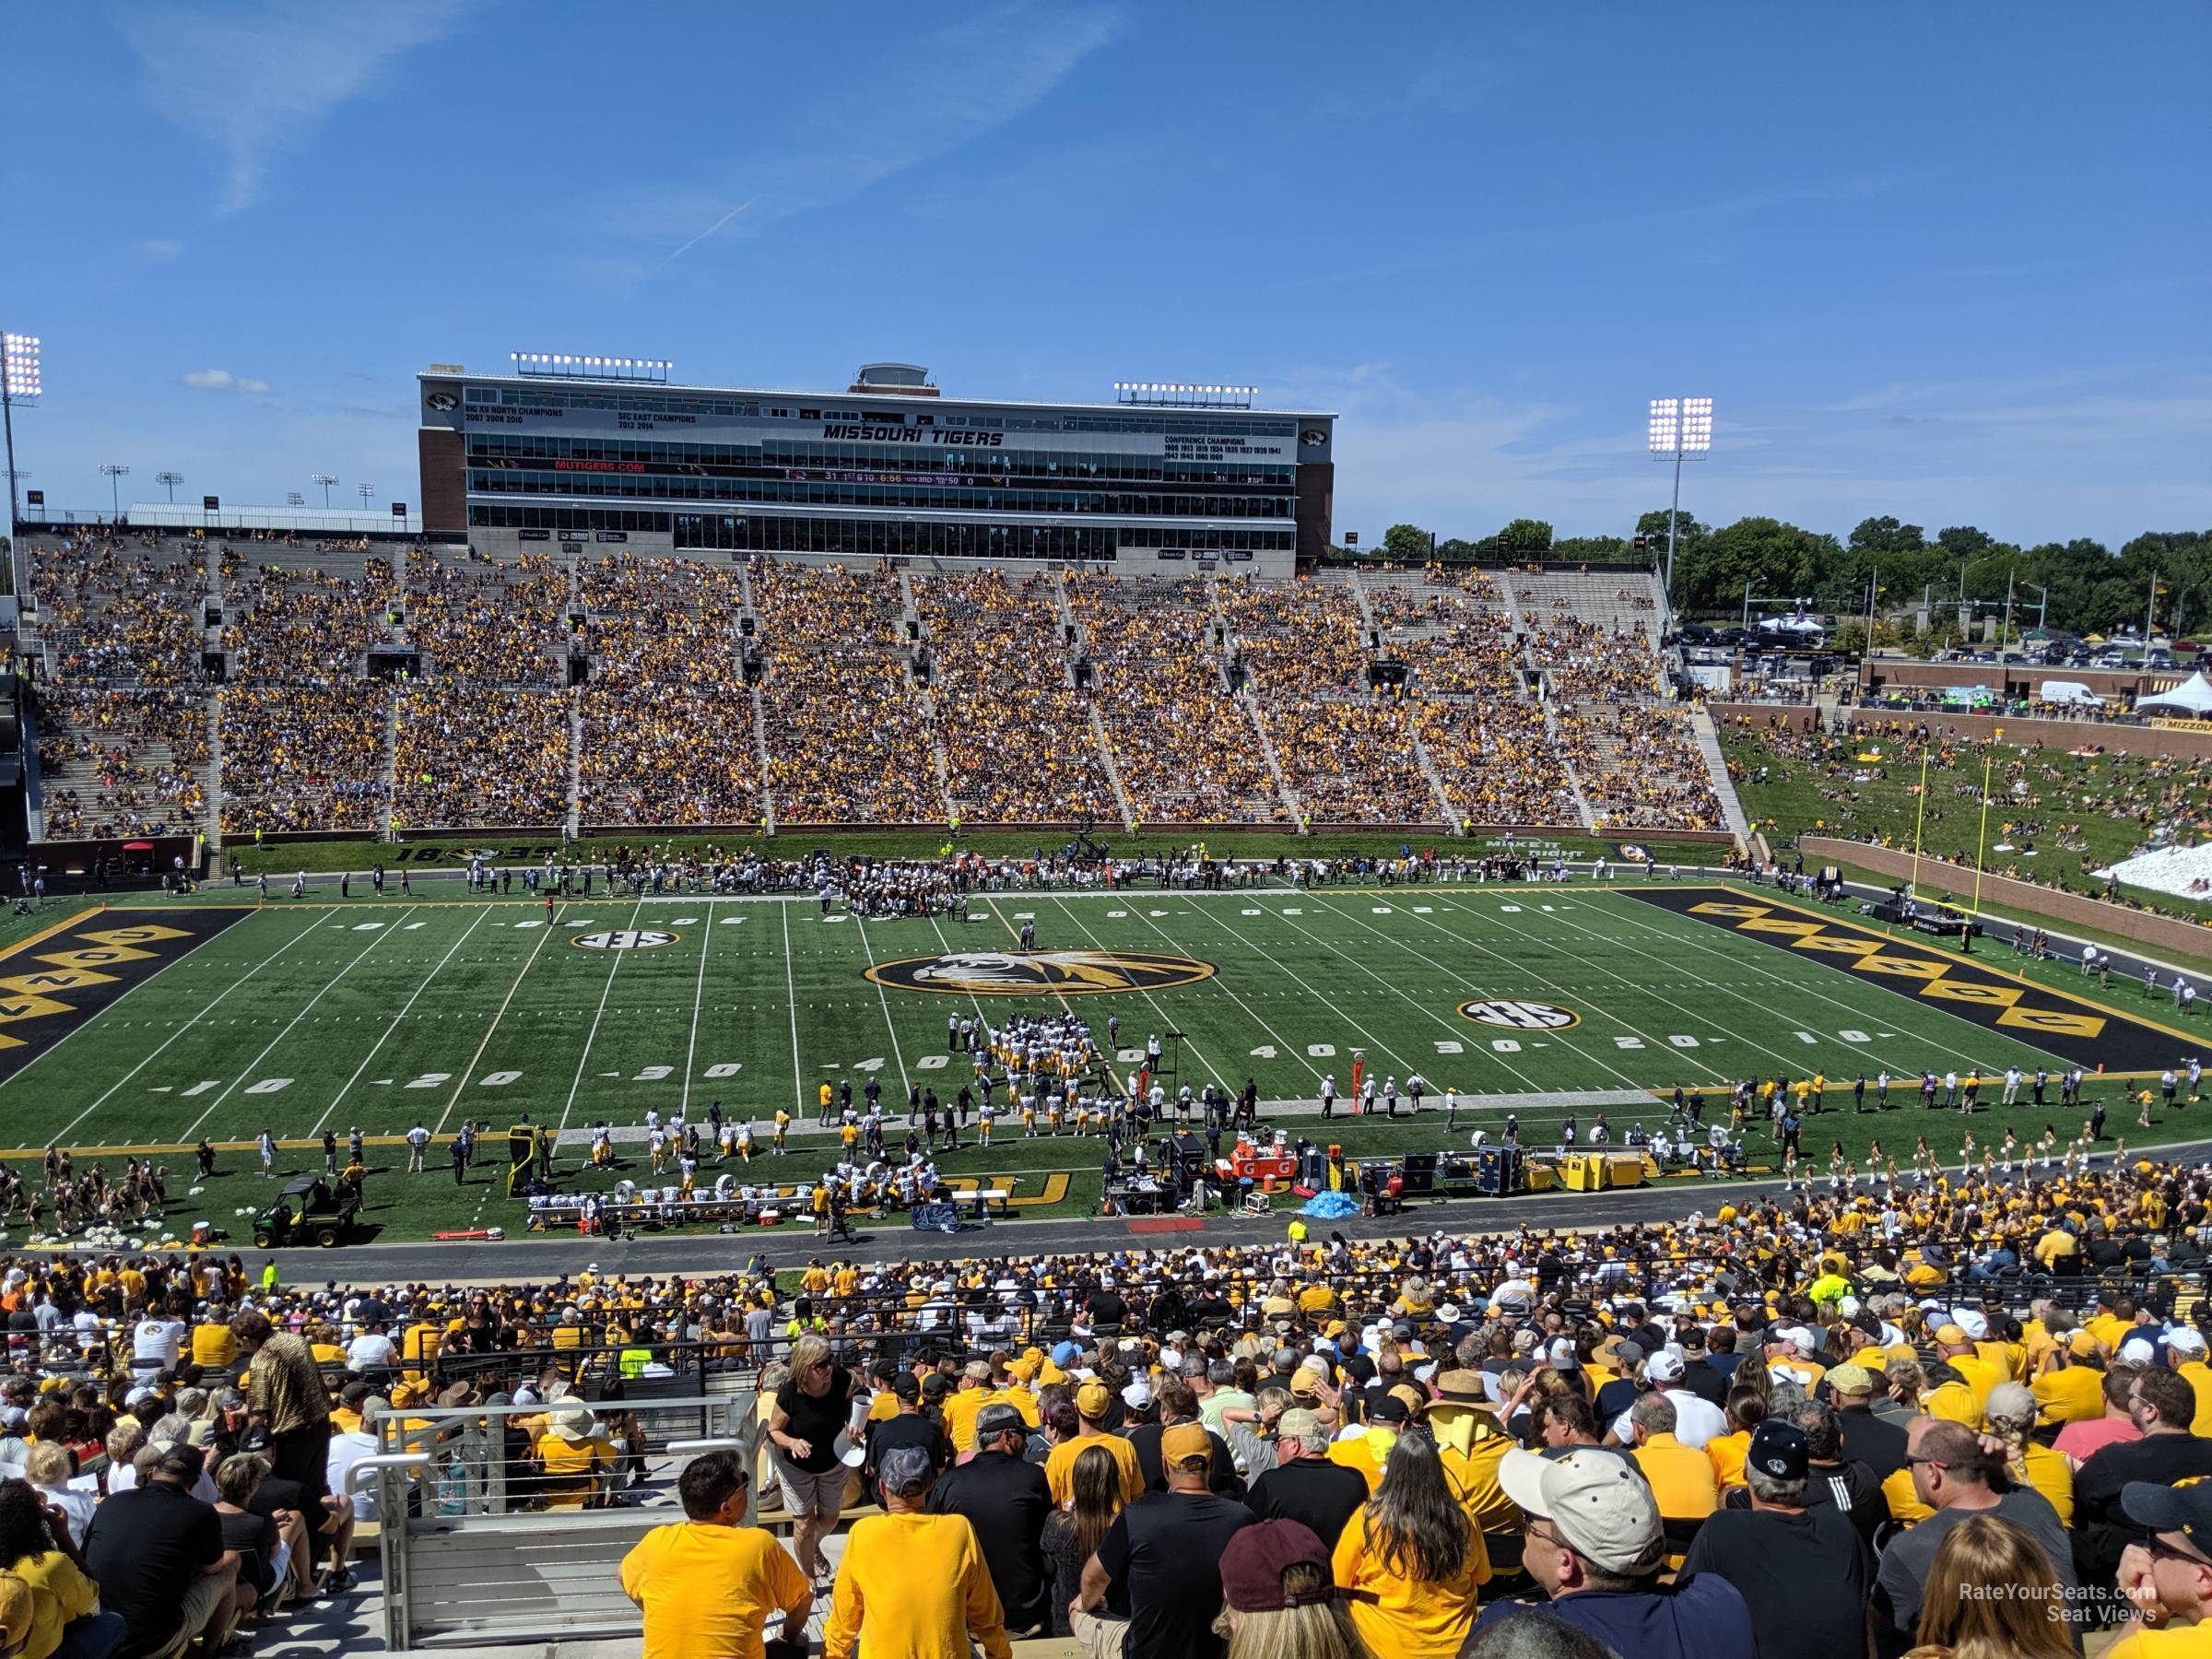 section 209 seat view  - faurot field